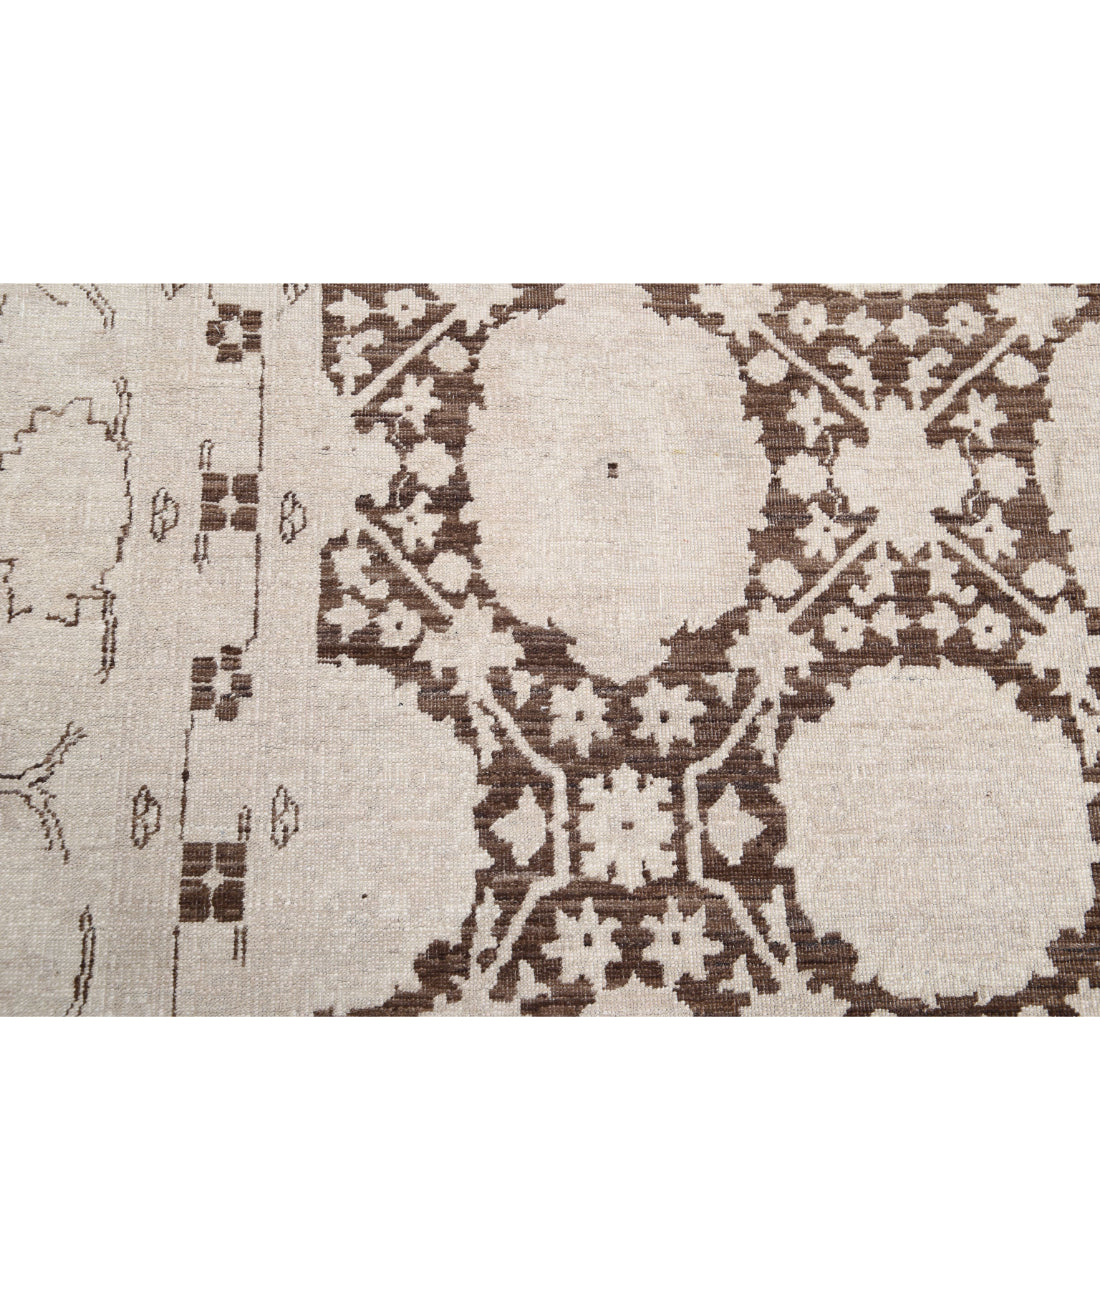 Hand Knotted Serenity Wool Rug - 11'8'' x 14'5'' 11'8'' x 14'5'' (350 X 433) / Brown / Ivory